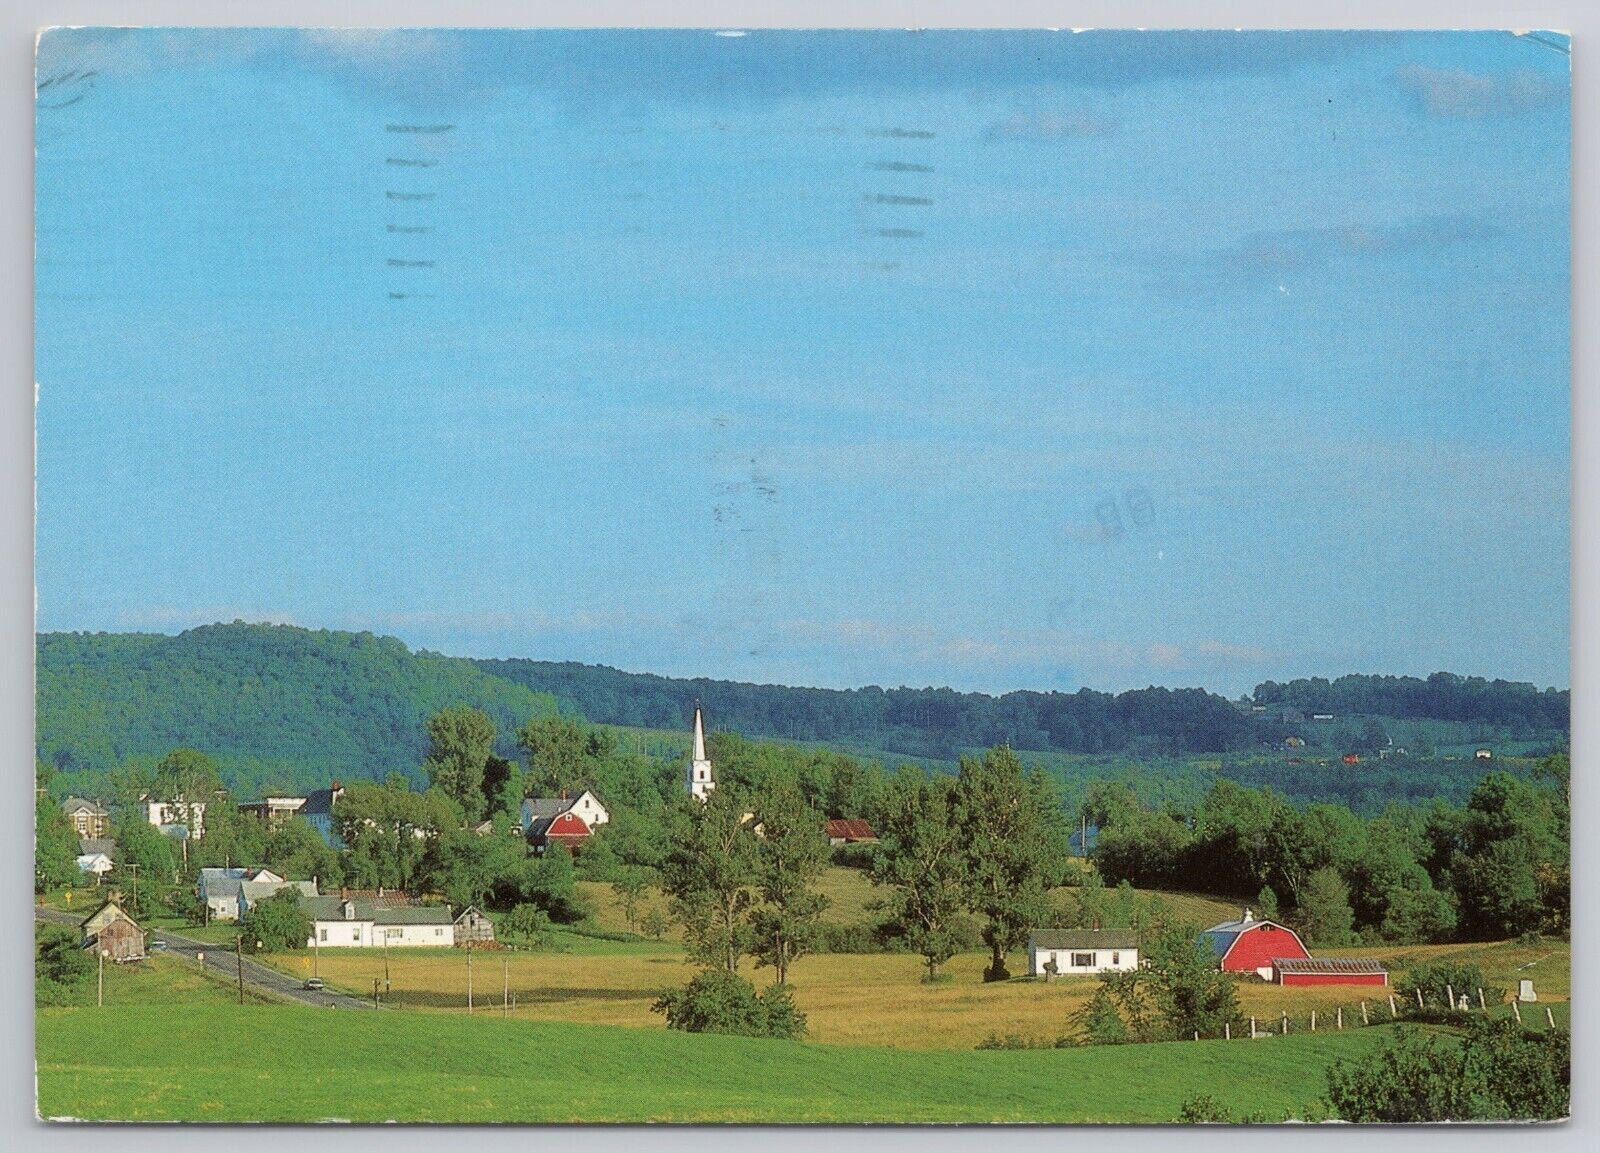 Postcard Picturesque Irasburg Vermont Barn and Small Town